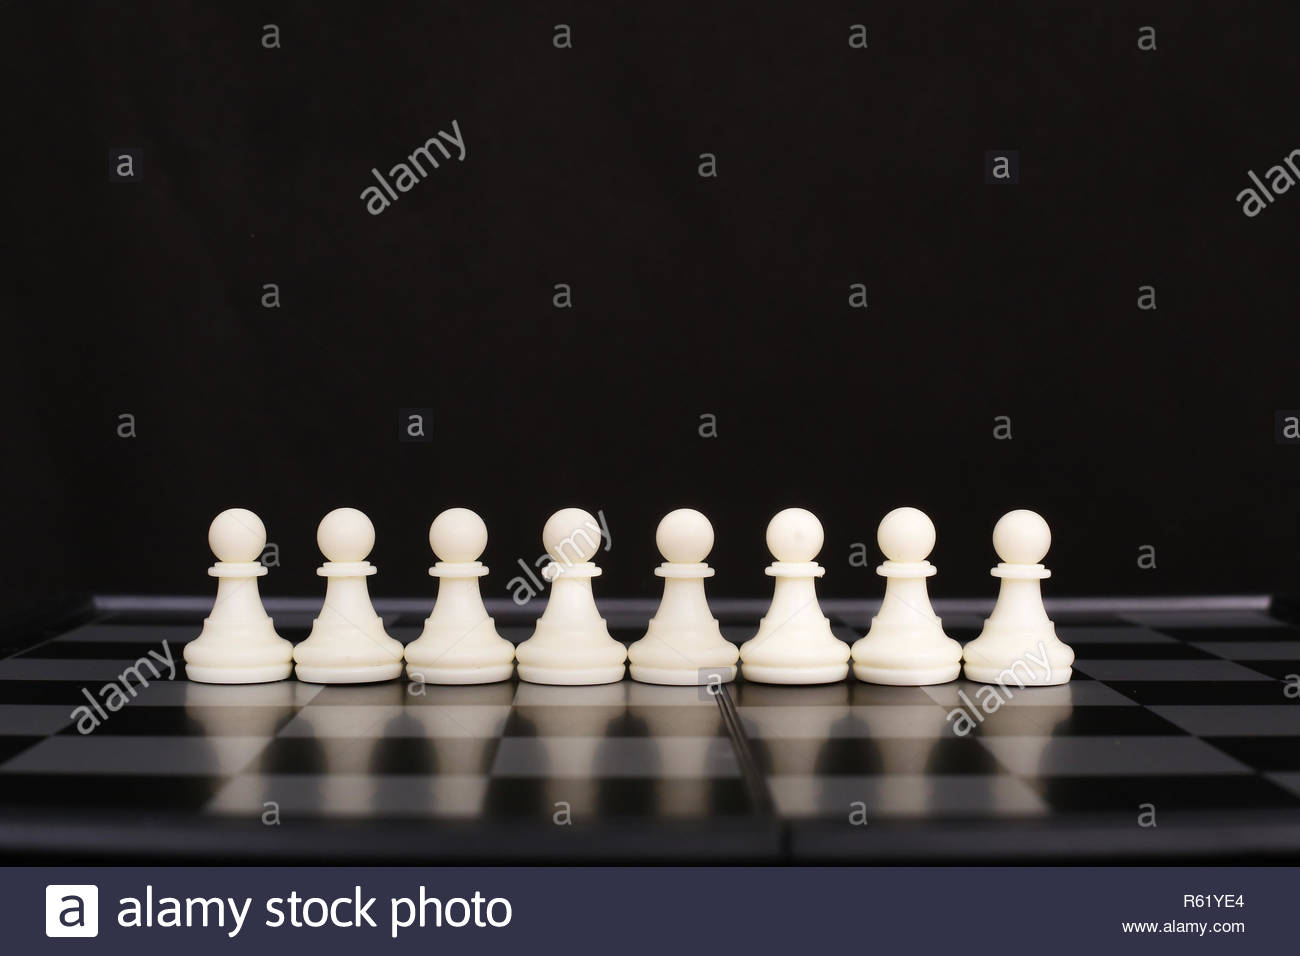 Picture Of White Chess Pawn And Chessboard Isolated On The Black